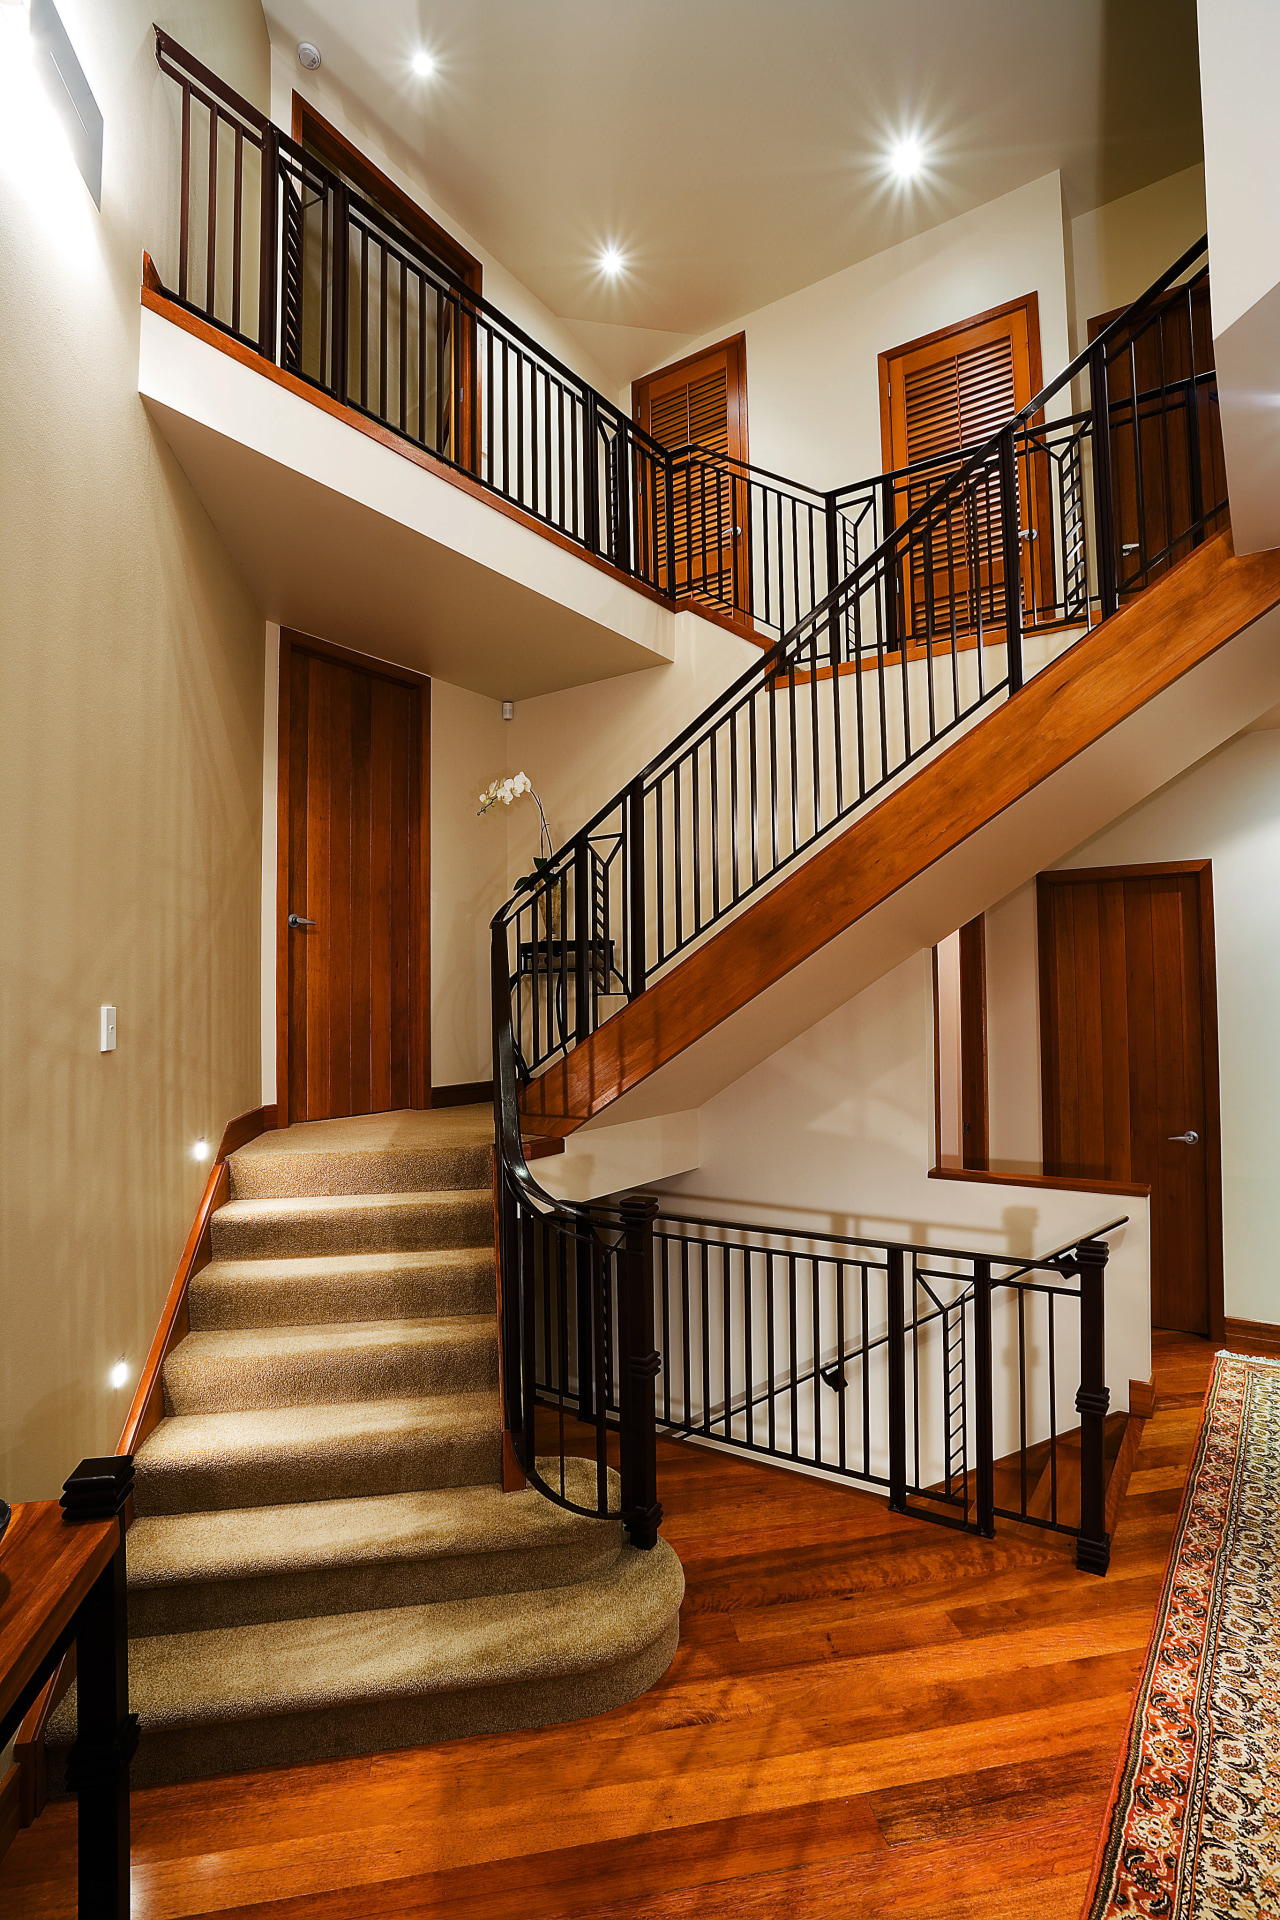 A view of a staircase from Knob's &amp; architecture, baluster, ceiling, daylighting, estate, floor, flooring, handrail, hardwood, home, interior design, lobby, real estate, stairs, wood, wood flooring, brown